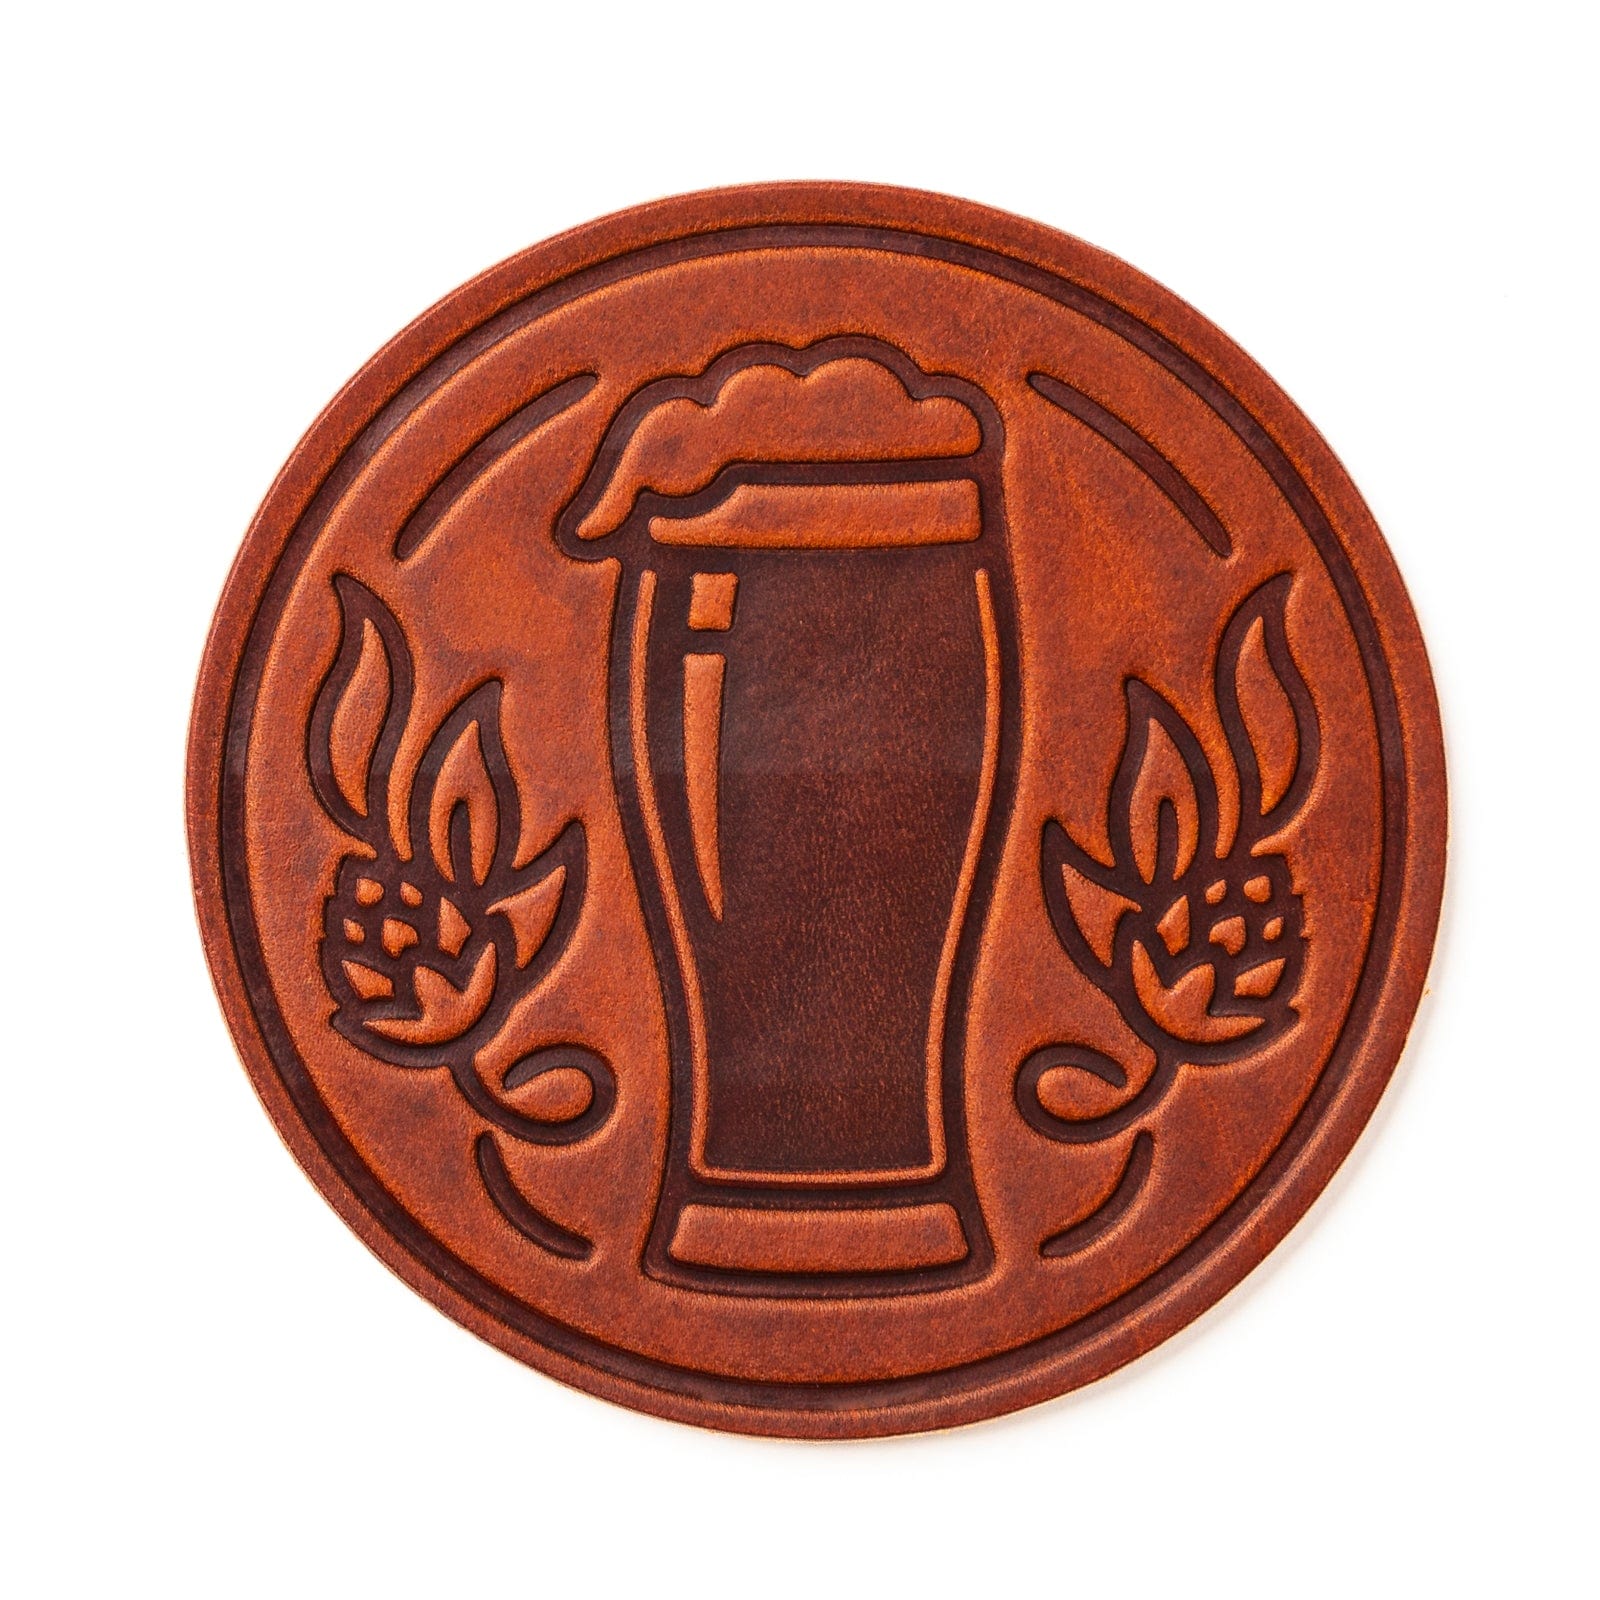 Beer Coasters - English Tan - 4 Pack Popov Leather